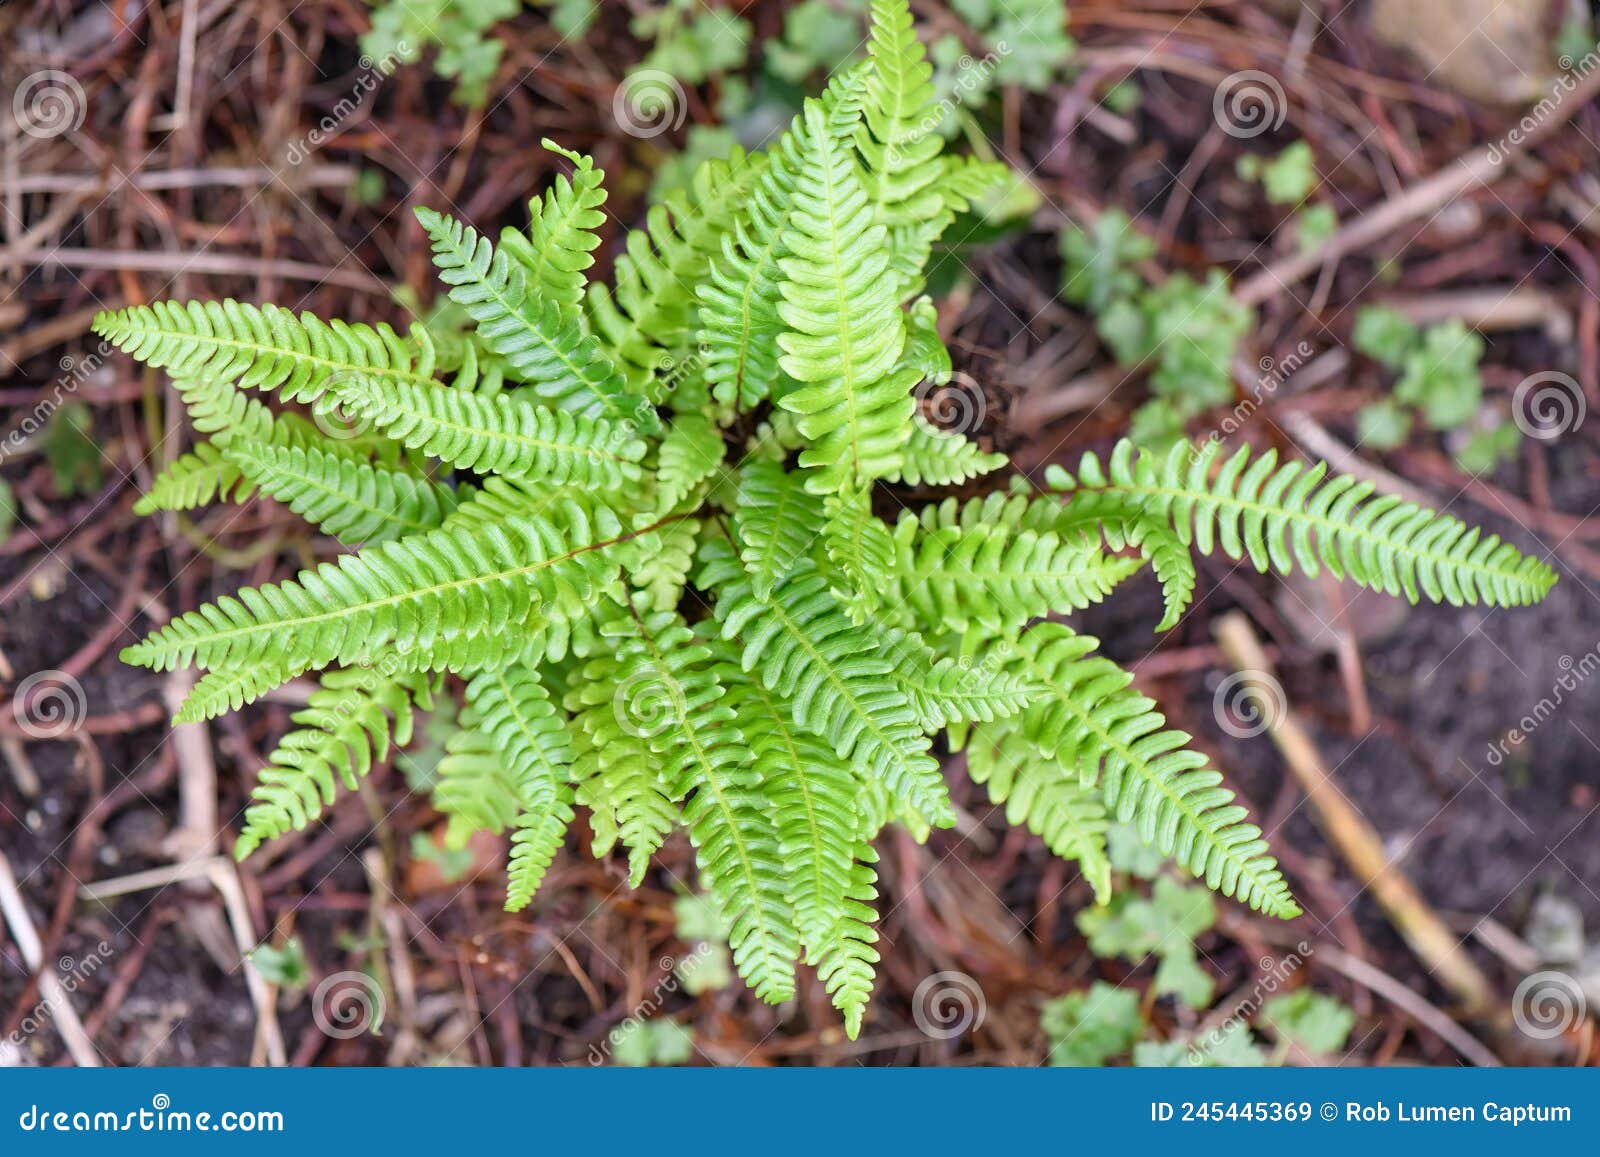 deer fern struthiopteris spicant, young plant from above